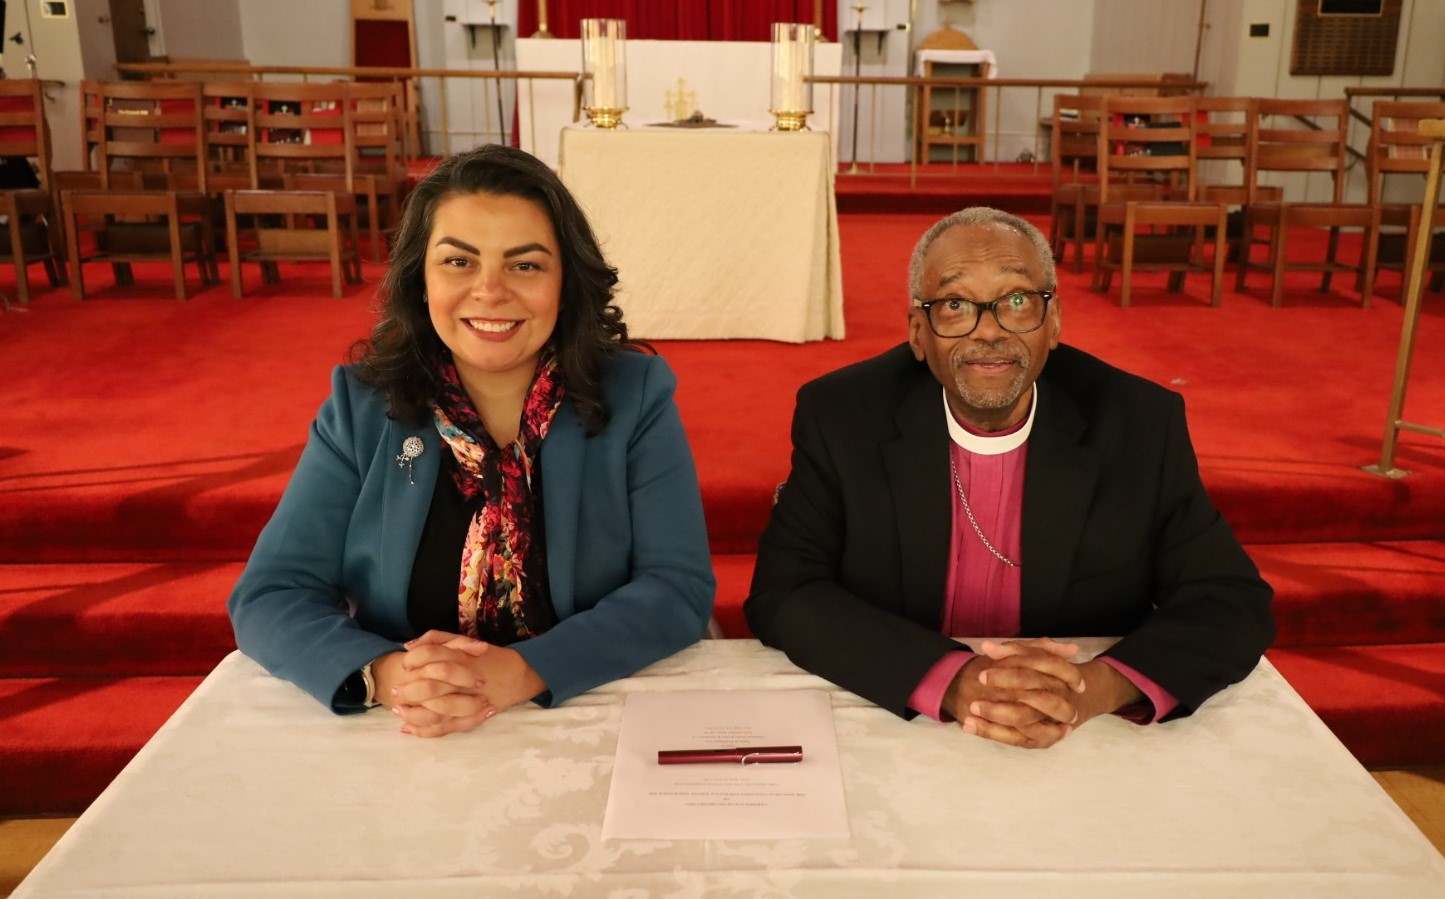 Episcopal Church leaders launch independent racial justice coalition